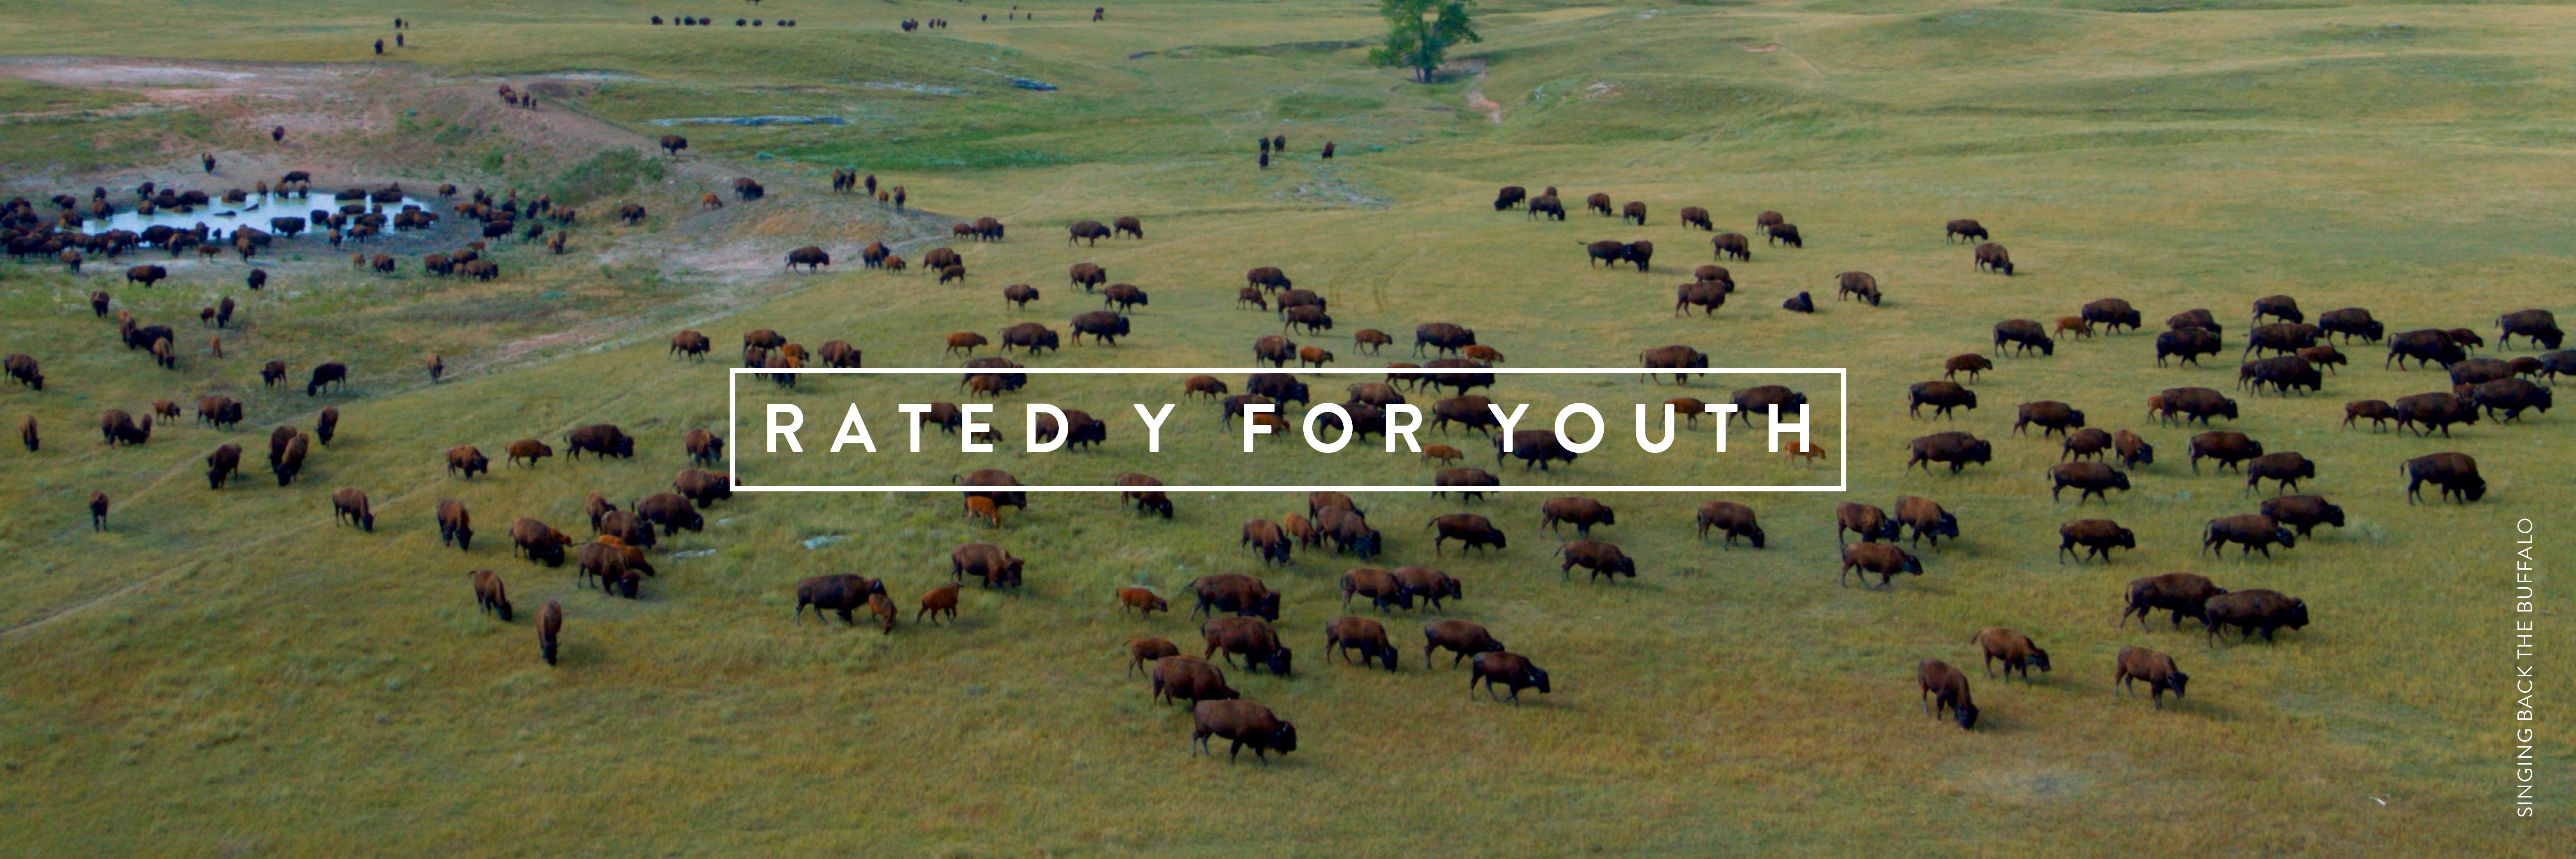 A herd of buffalo move across a green field. From the film Singing Back the Buffalo. The title Rated Y for Youth overlaid.